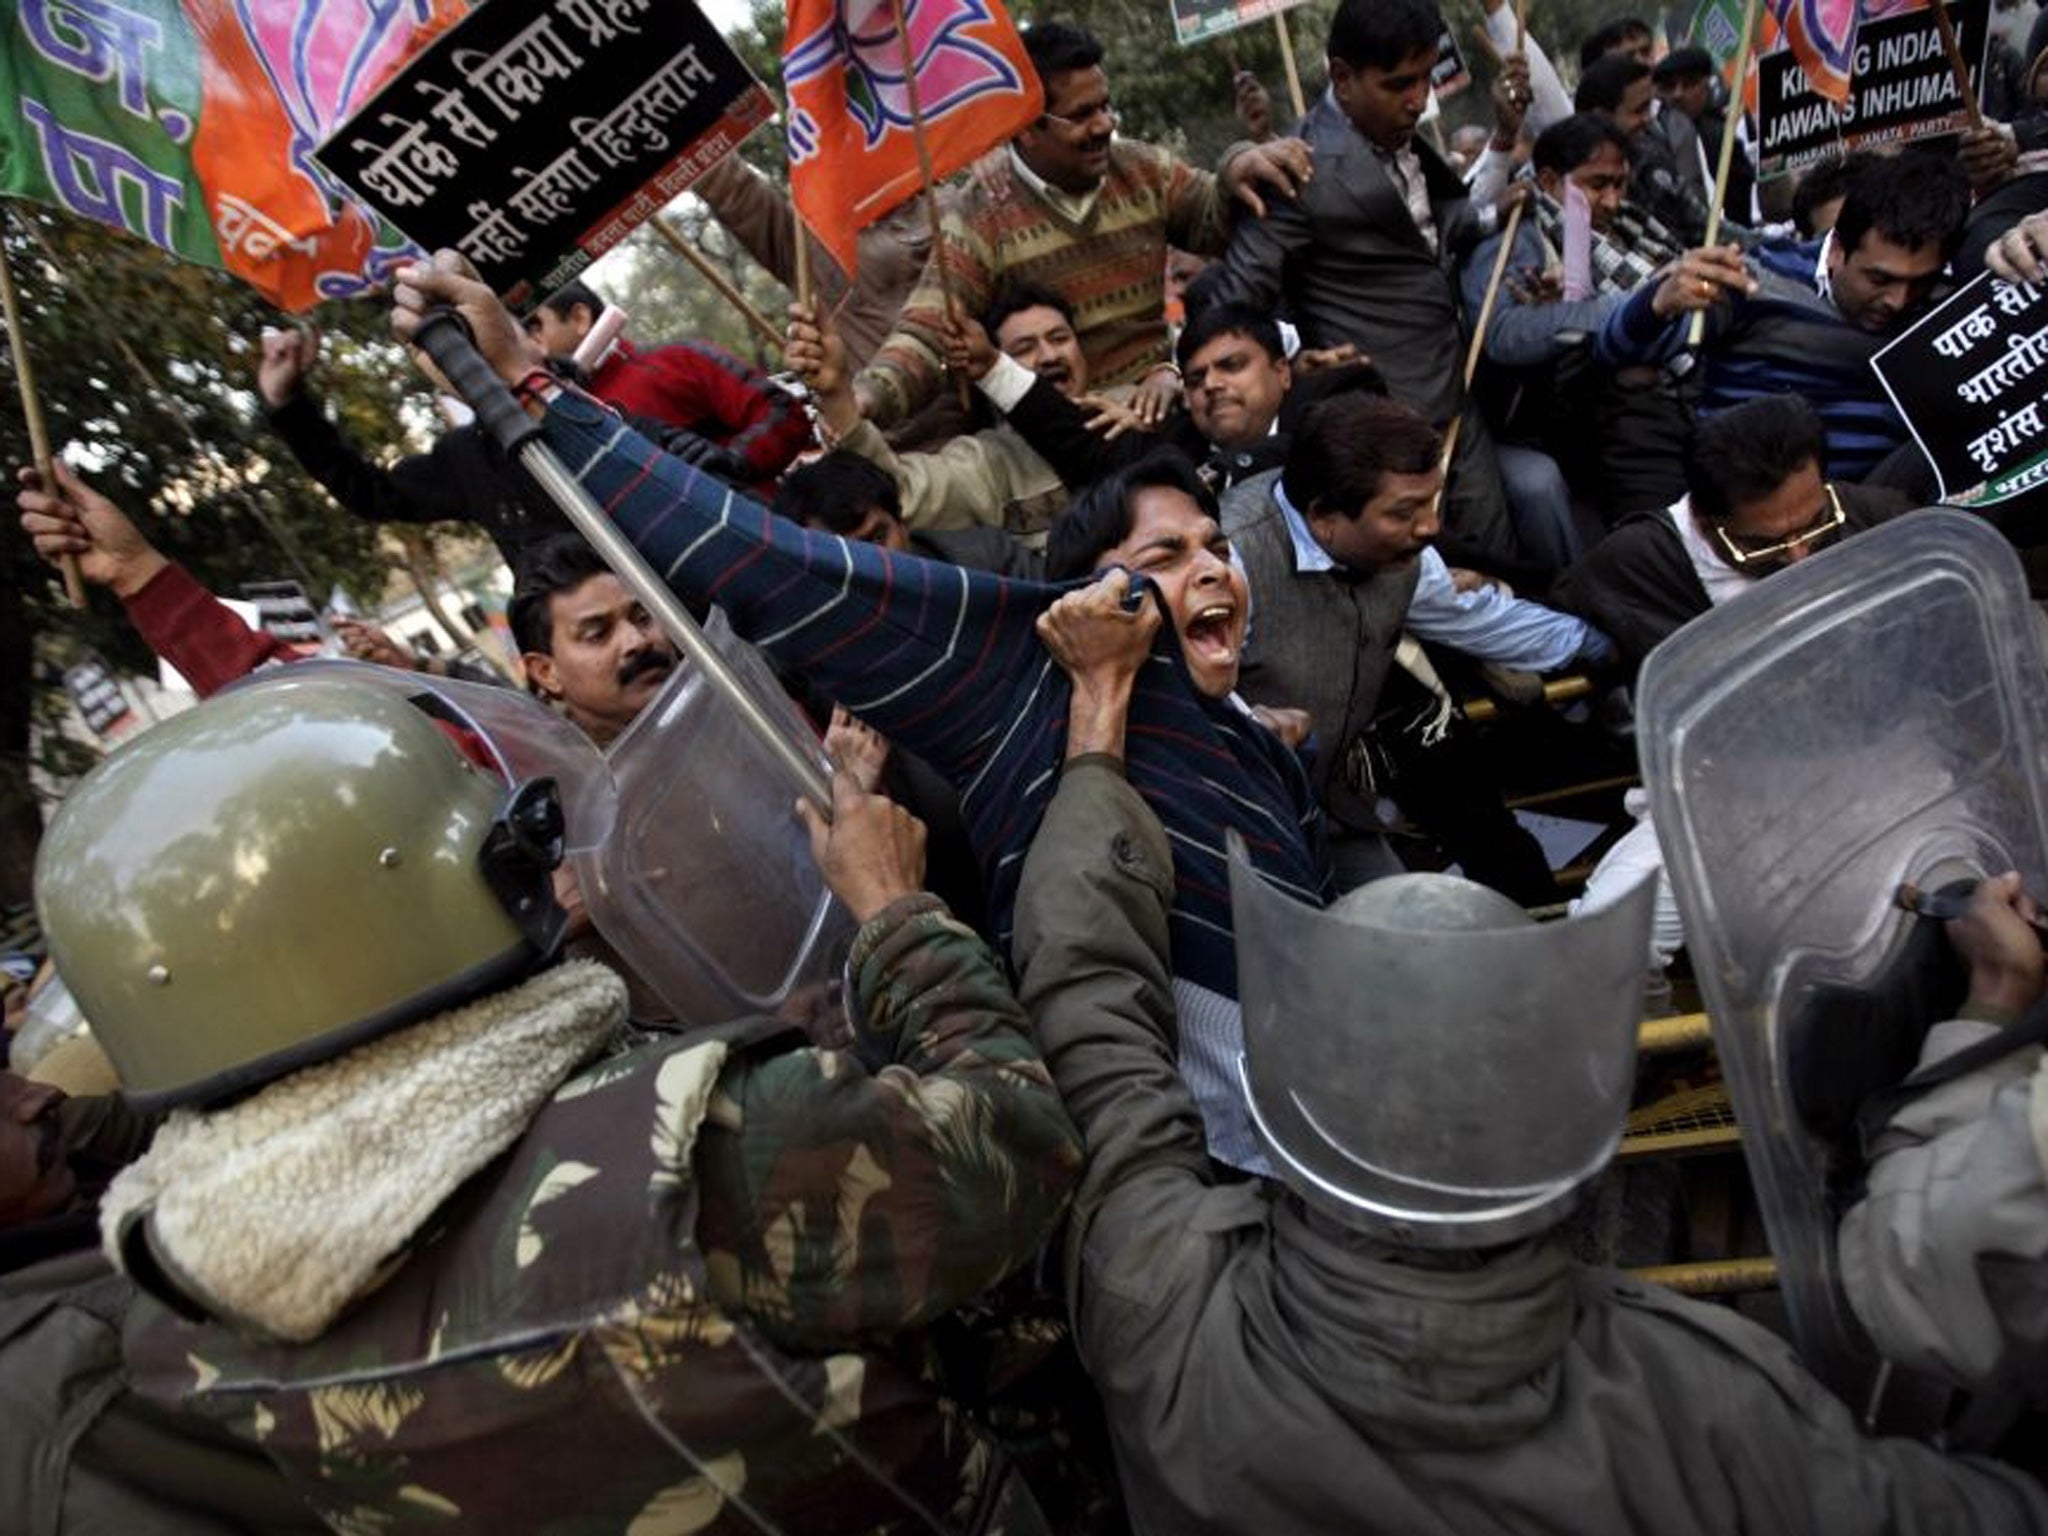 Supporters of India’s main opposition Bharatiya Janta Party protest against Pakistan in Delhi